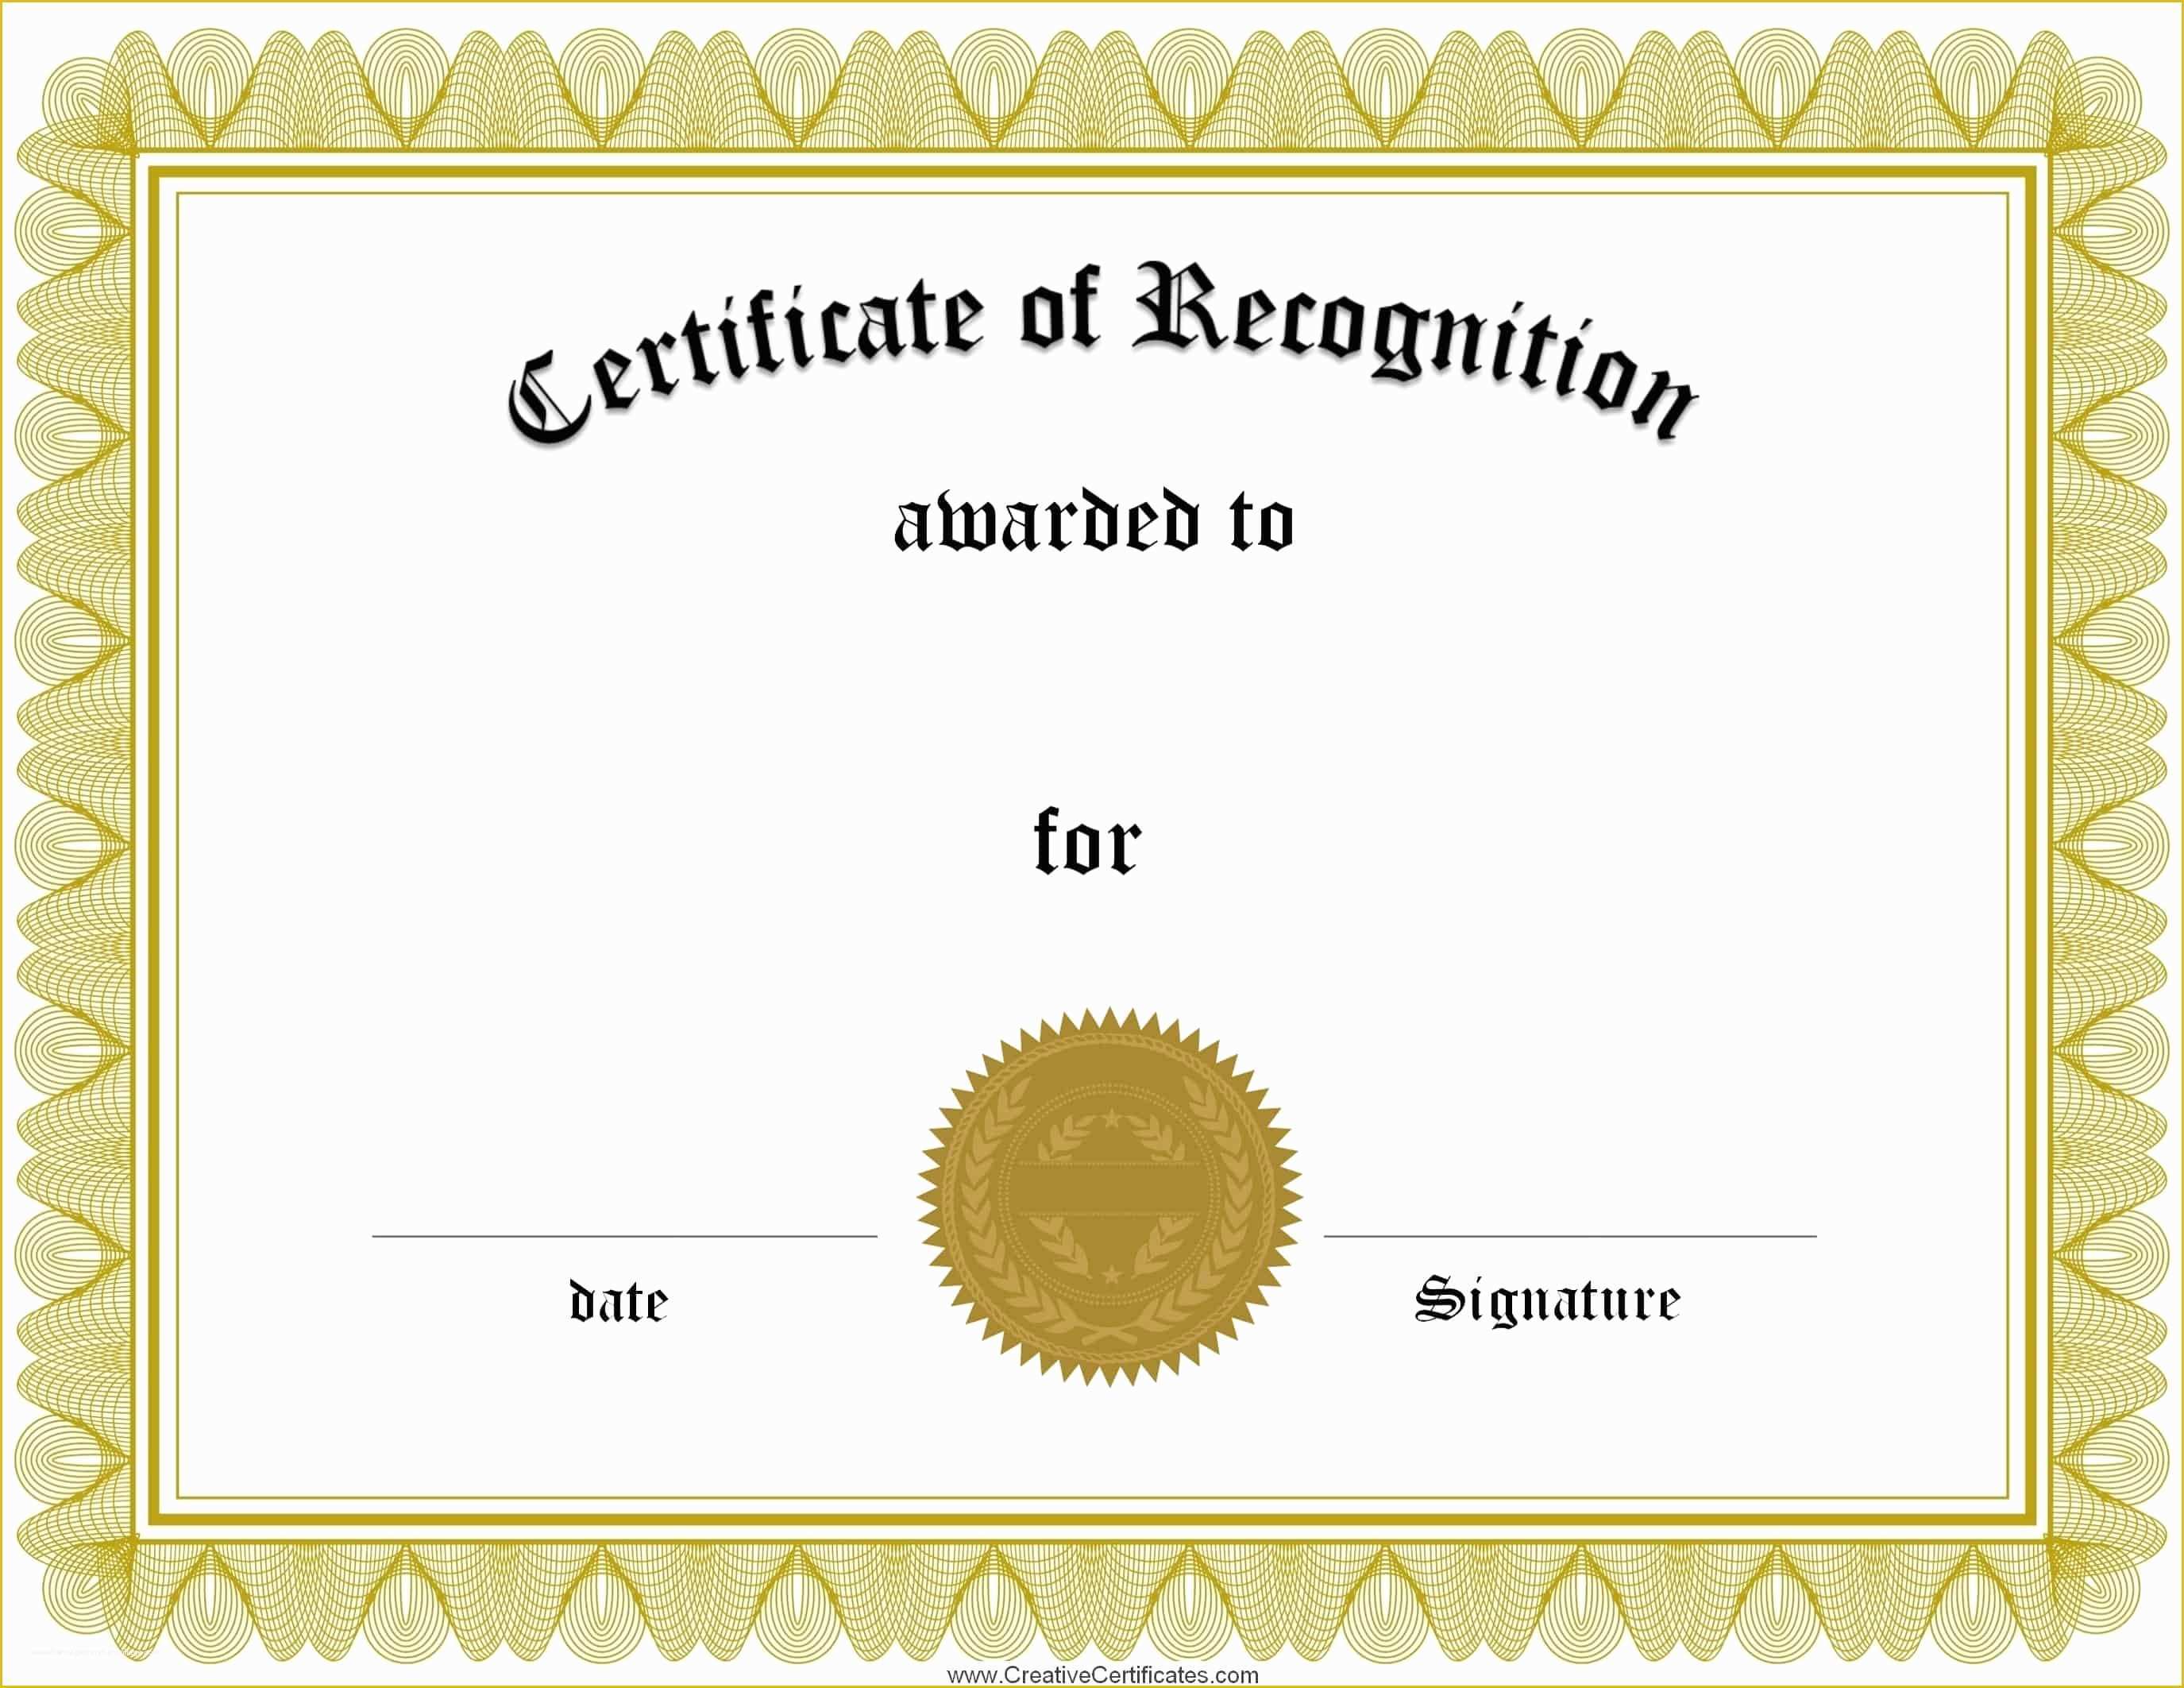 Certificate Of Recognition Template Free Of Free Certificate Of Recognition Template